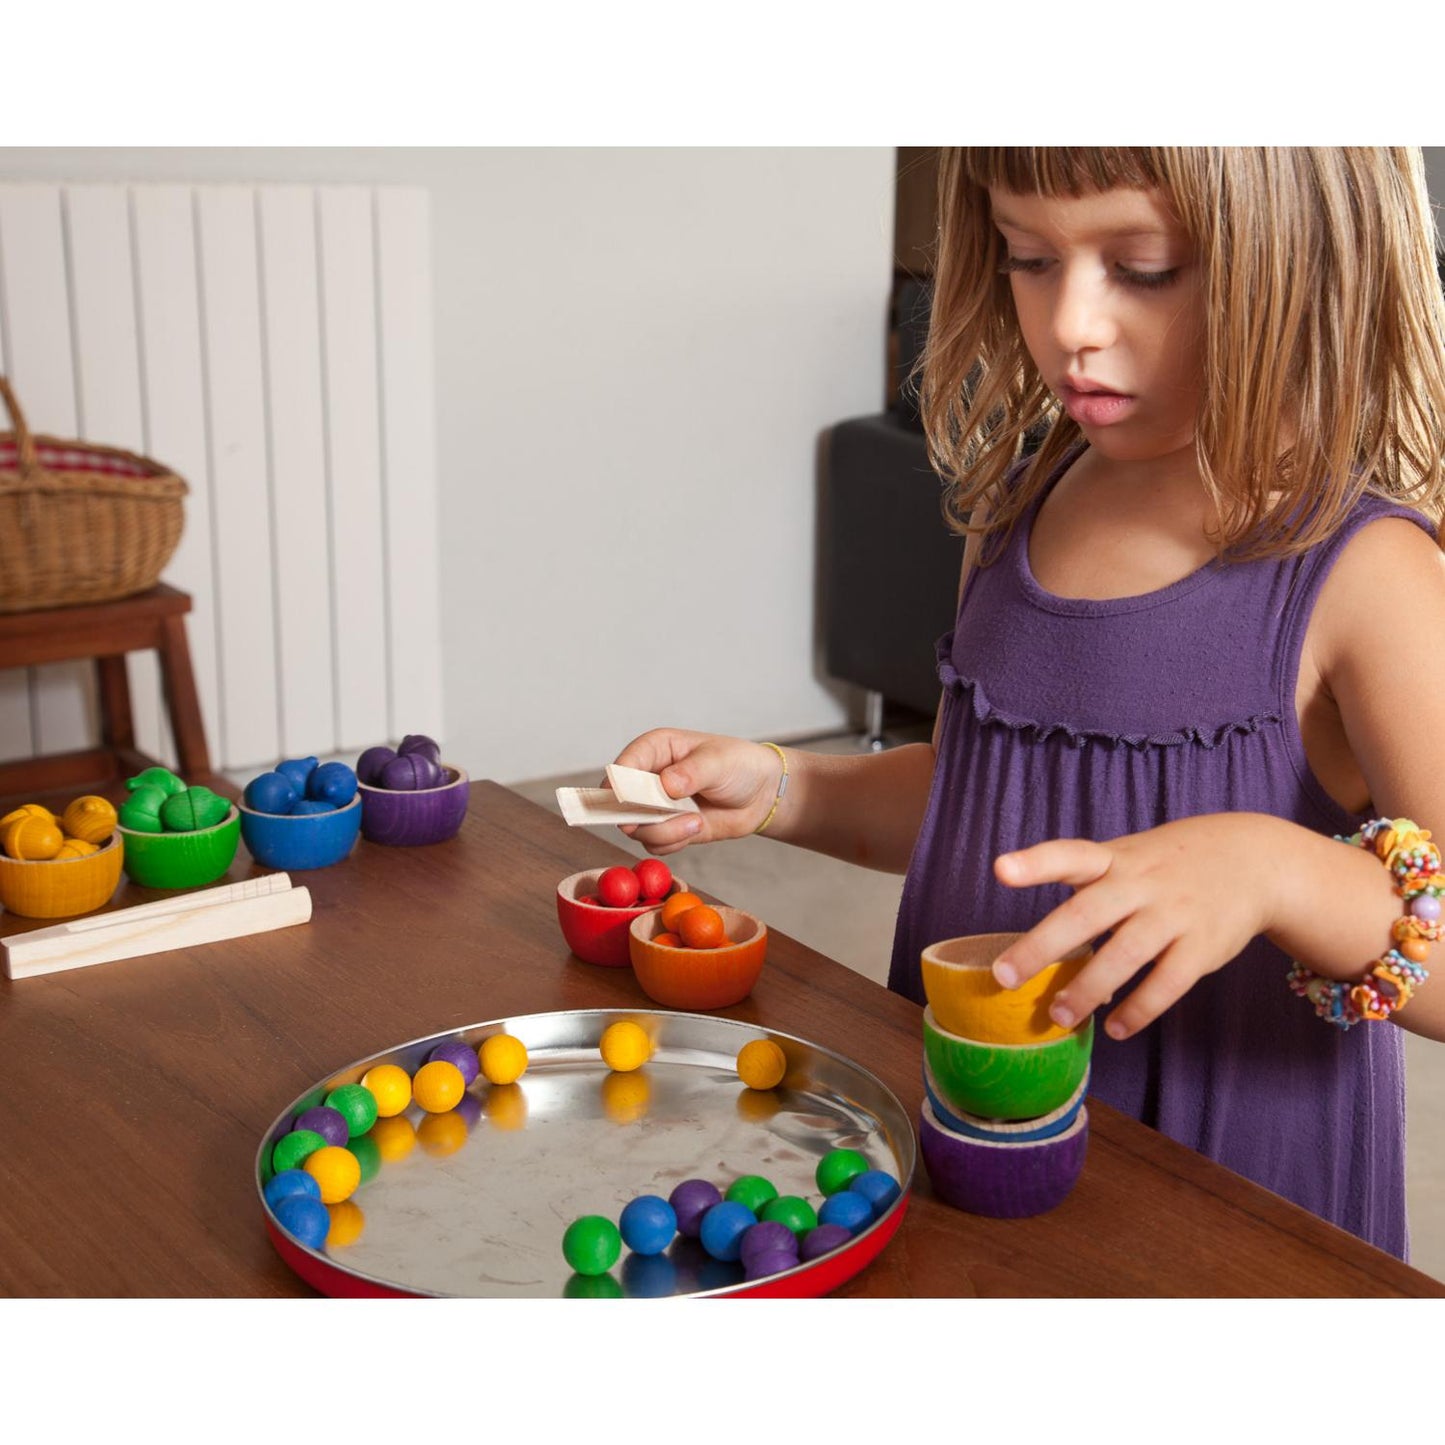 Bowls & Marbles | Wooden Toys for Kids | Open-Ended Play Set